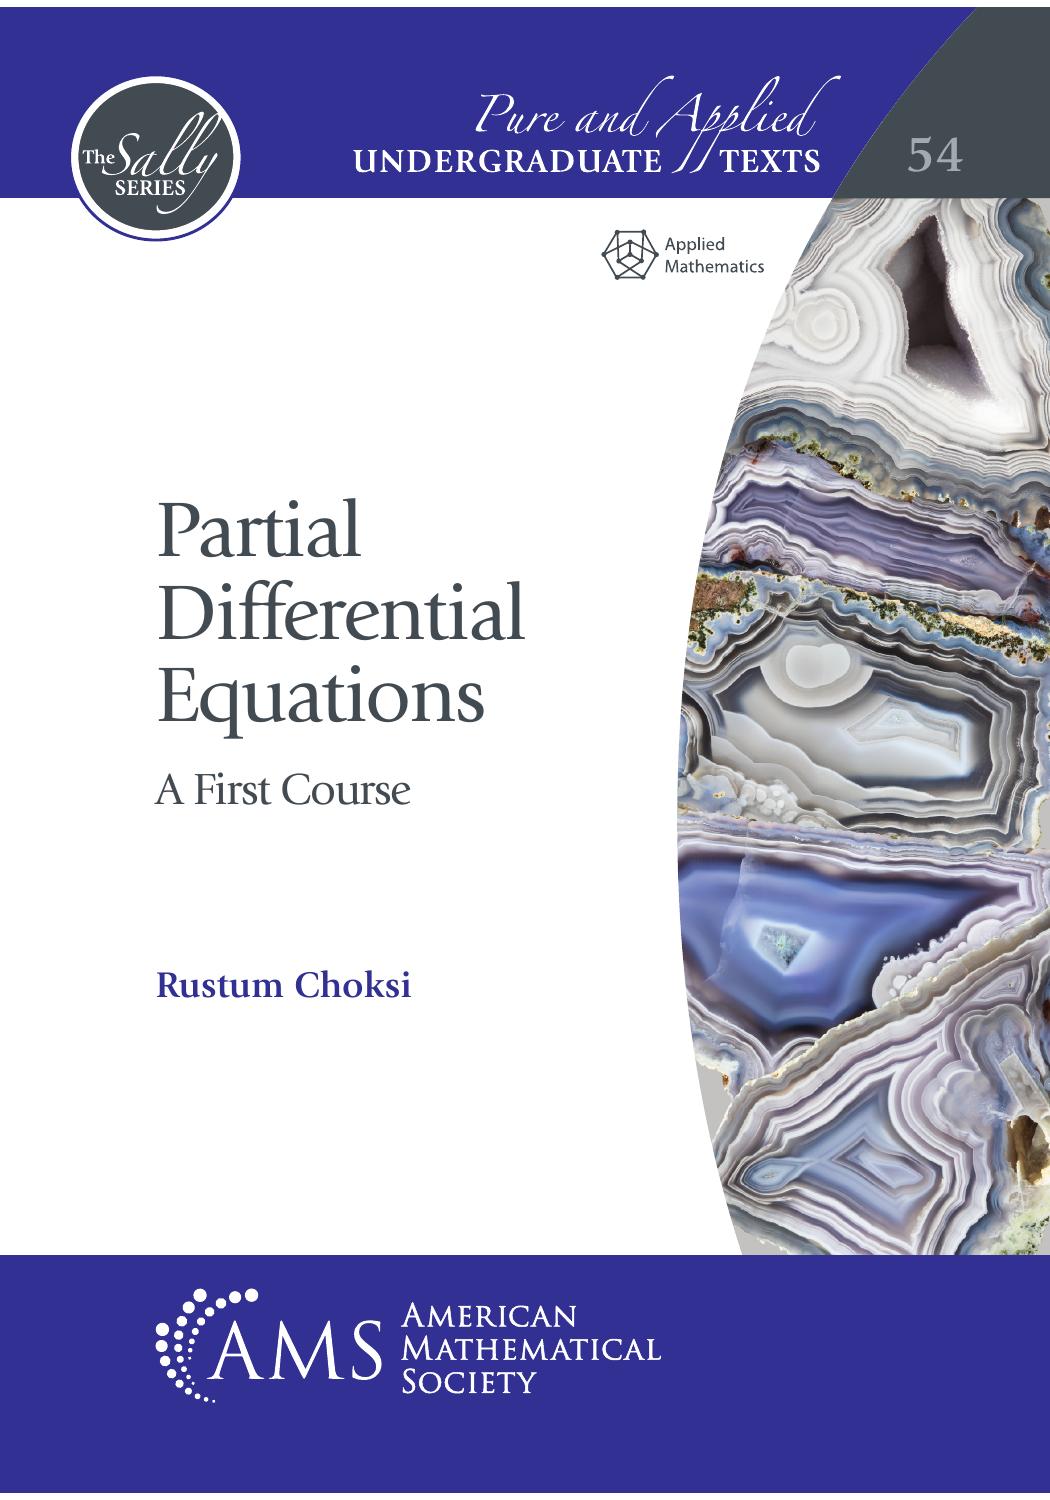 Partial Differential Equations: A First Course